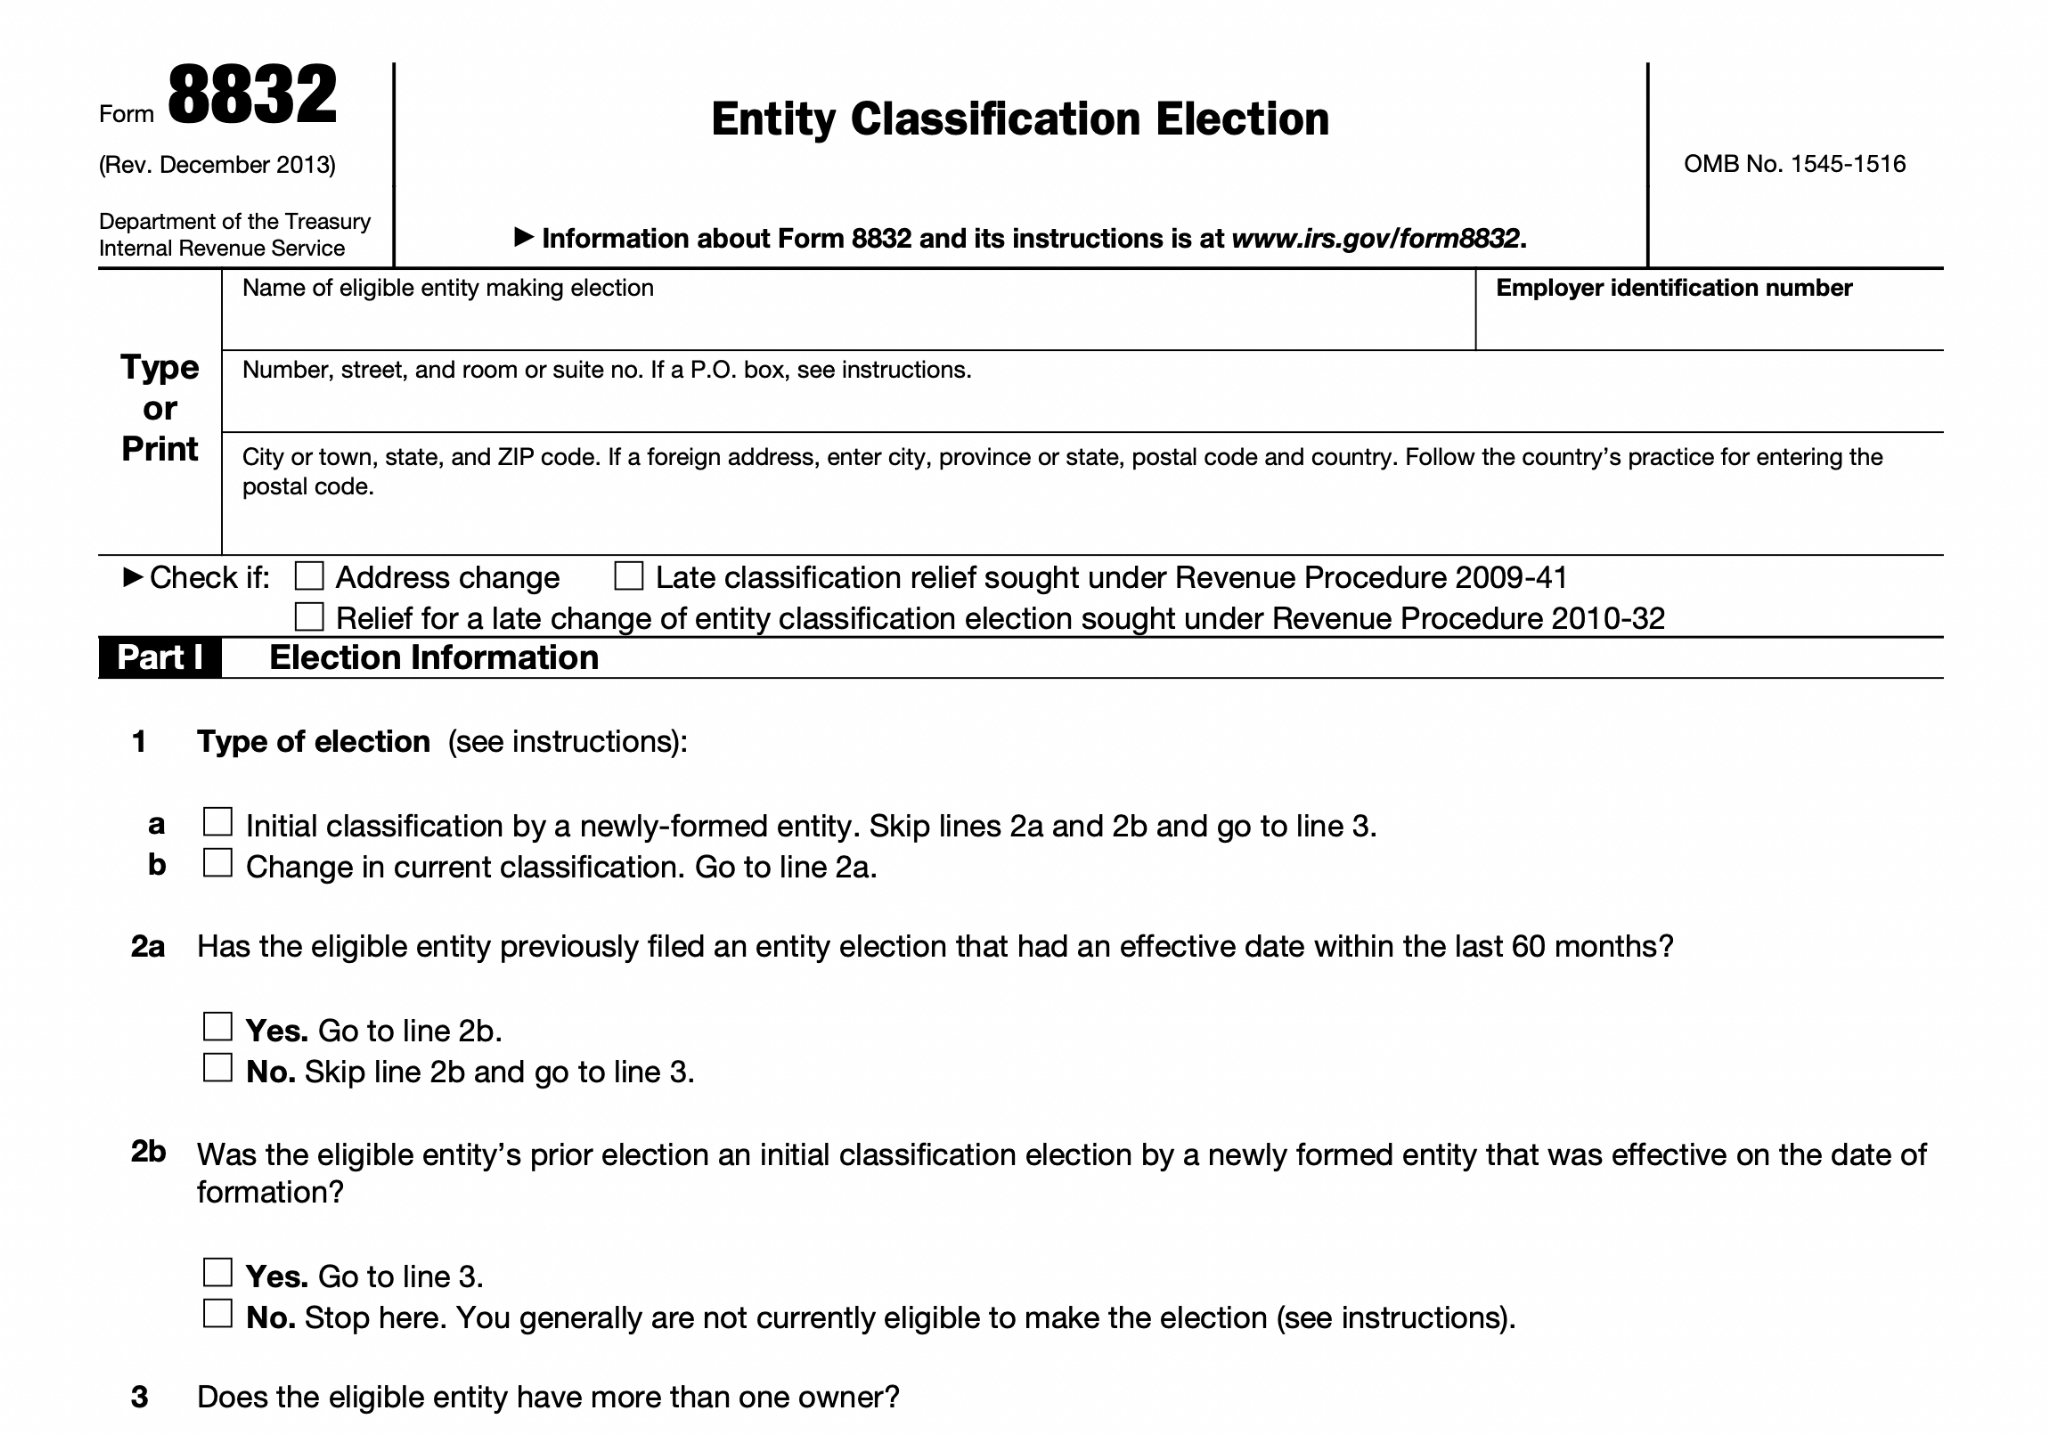 How to use Form 8832, Entity Classification Election?